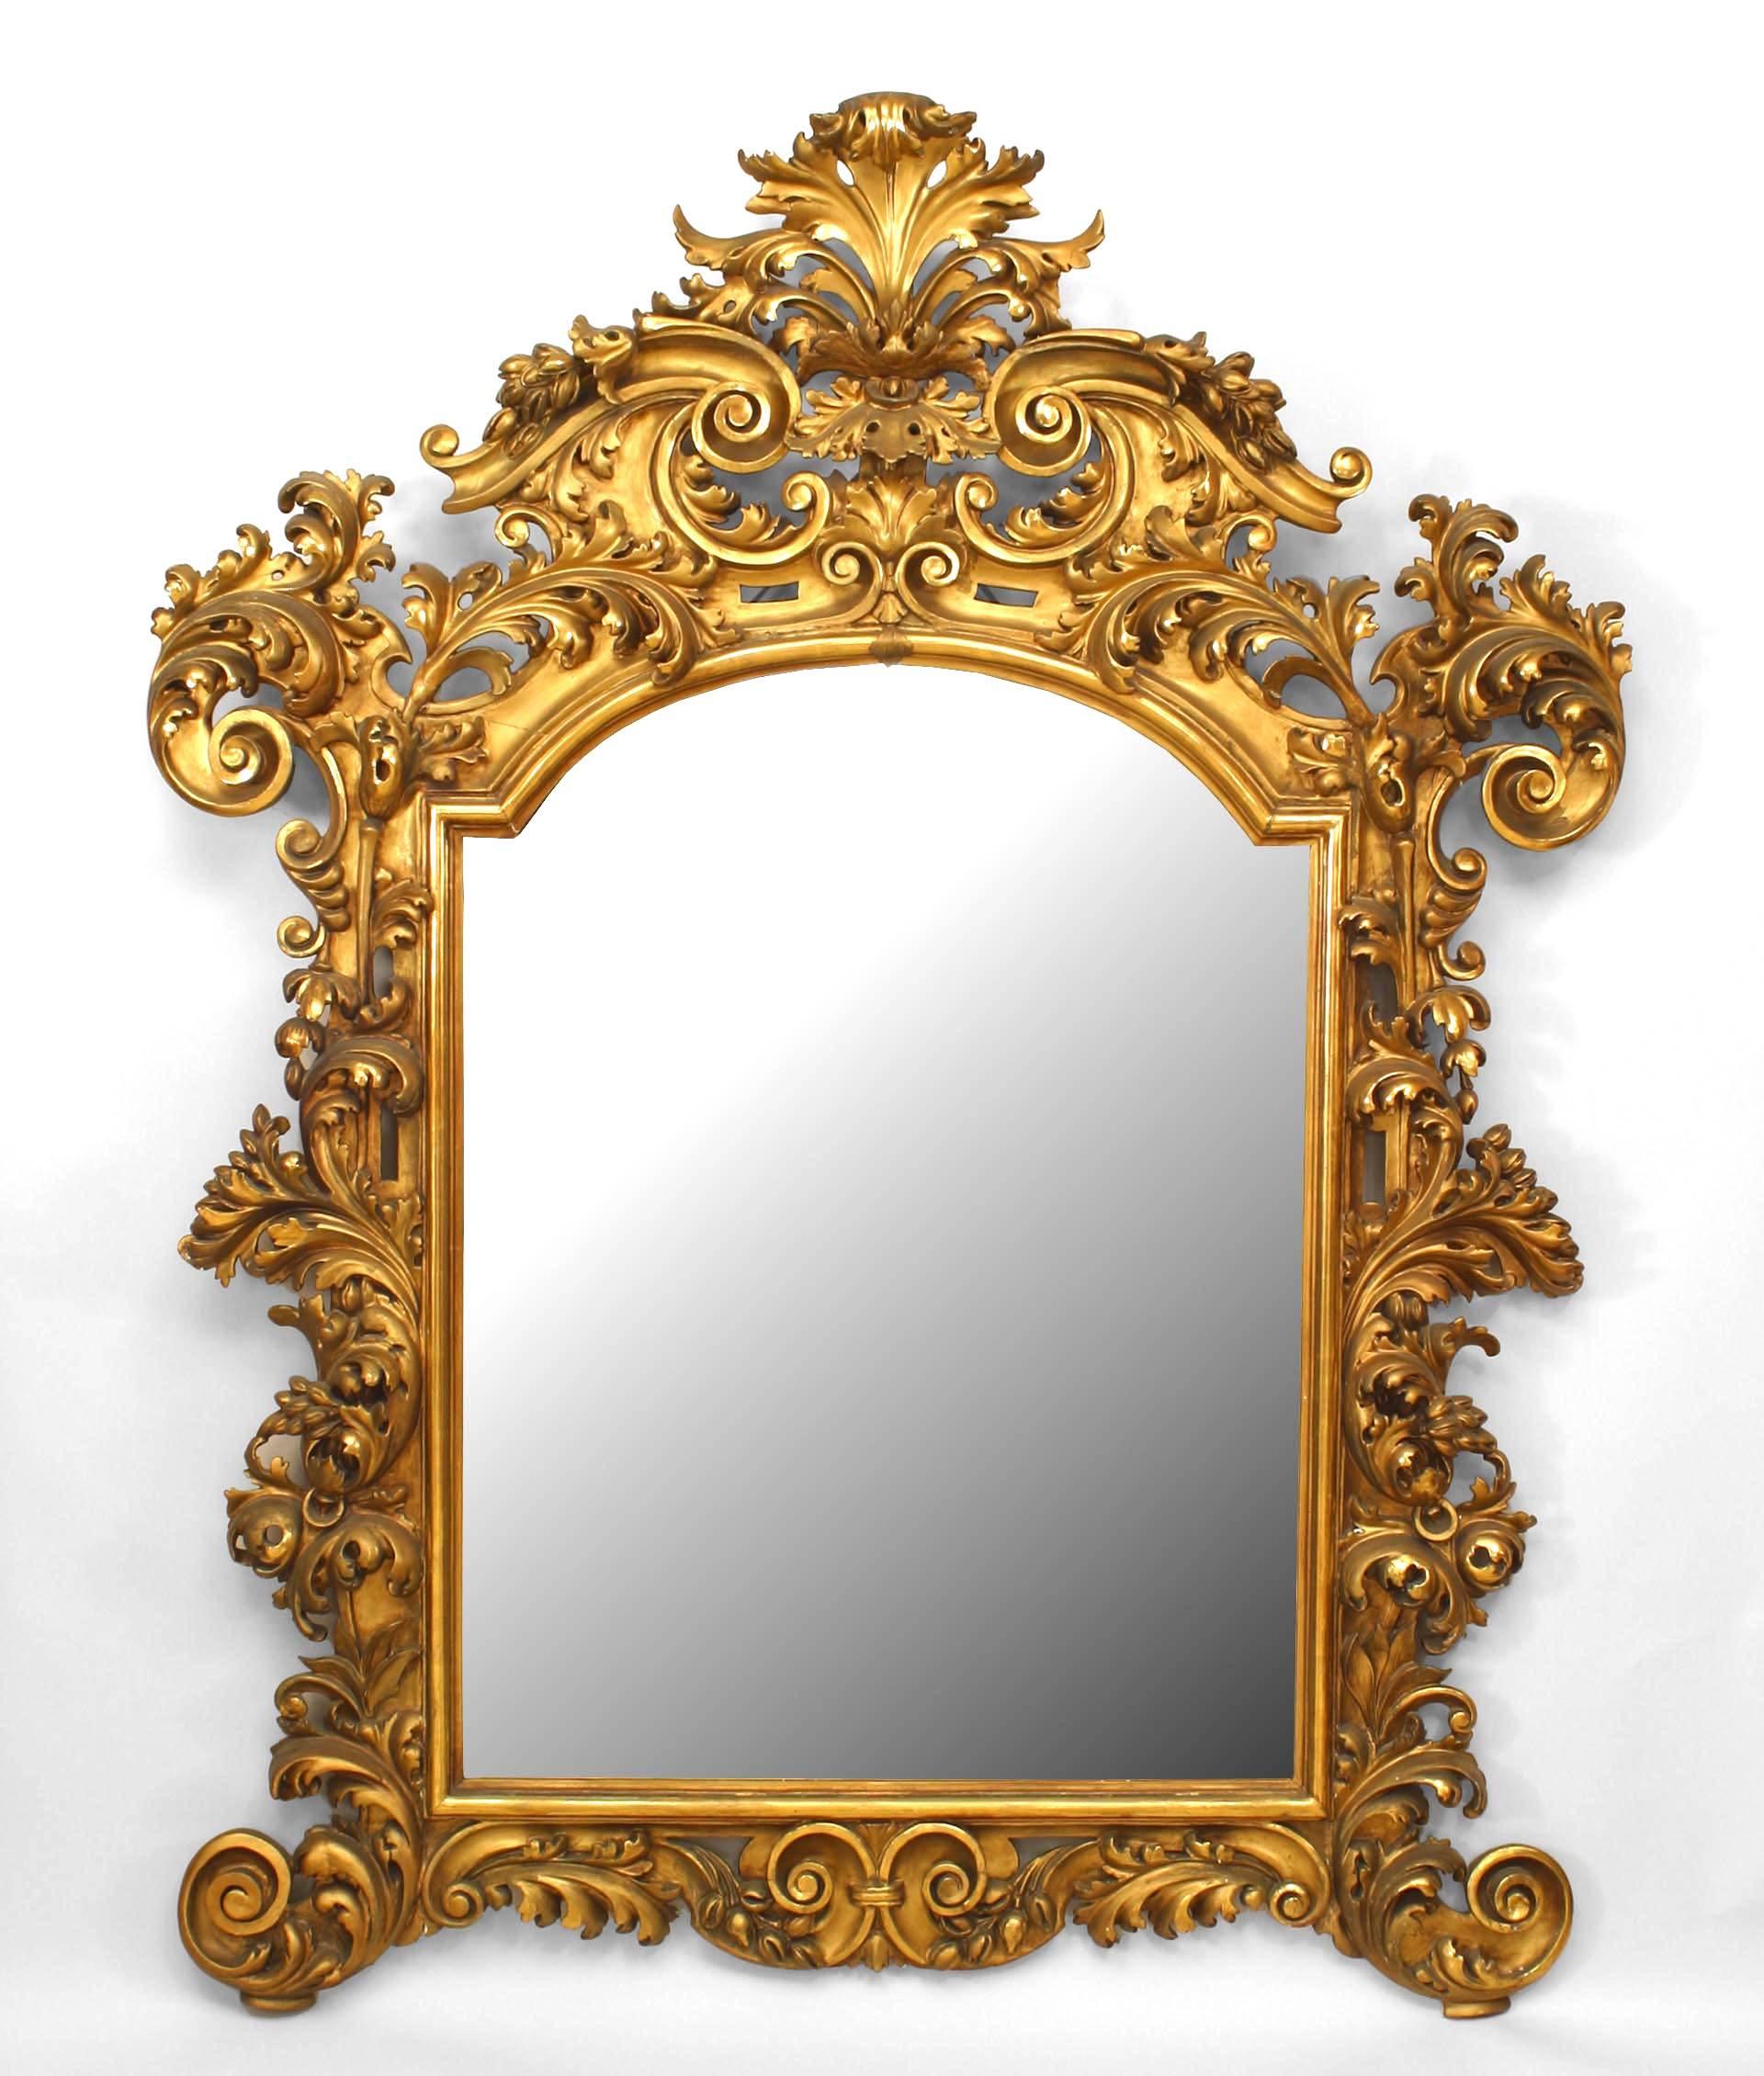 Italian Rococo (Florentine, 19th Century) giltwood wall mirror with extensive foliate carved filigree frame with a shell form pediment top.
